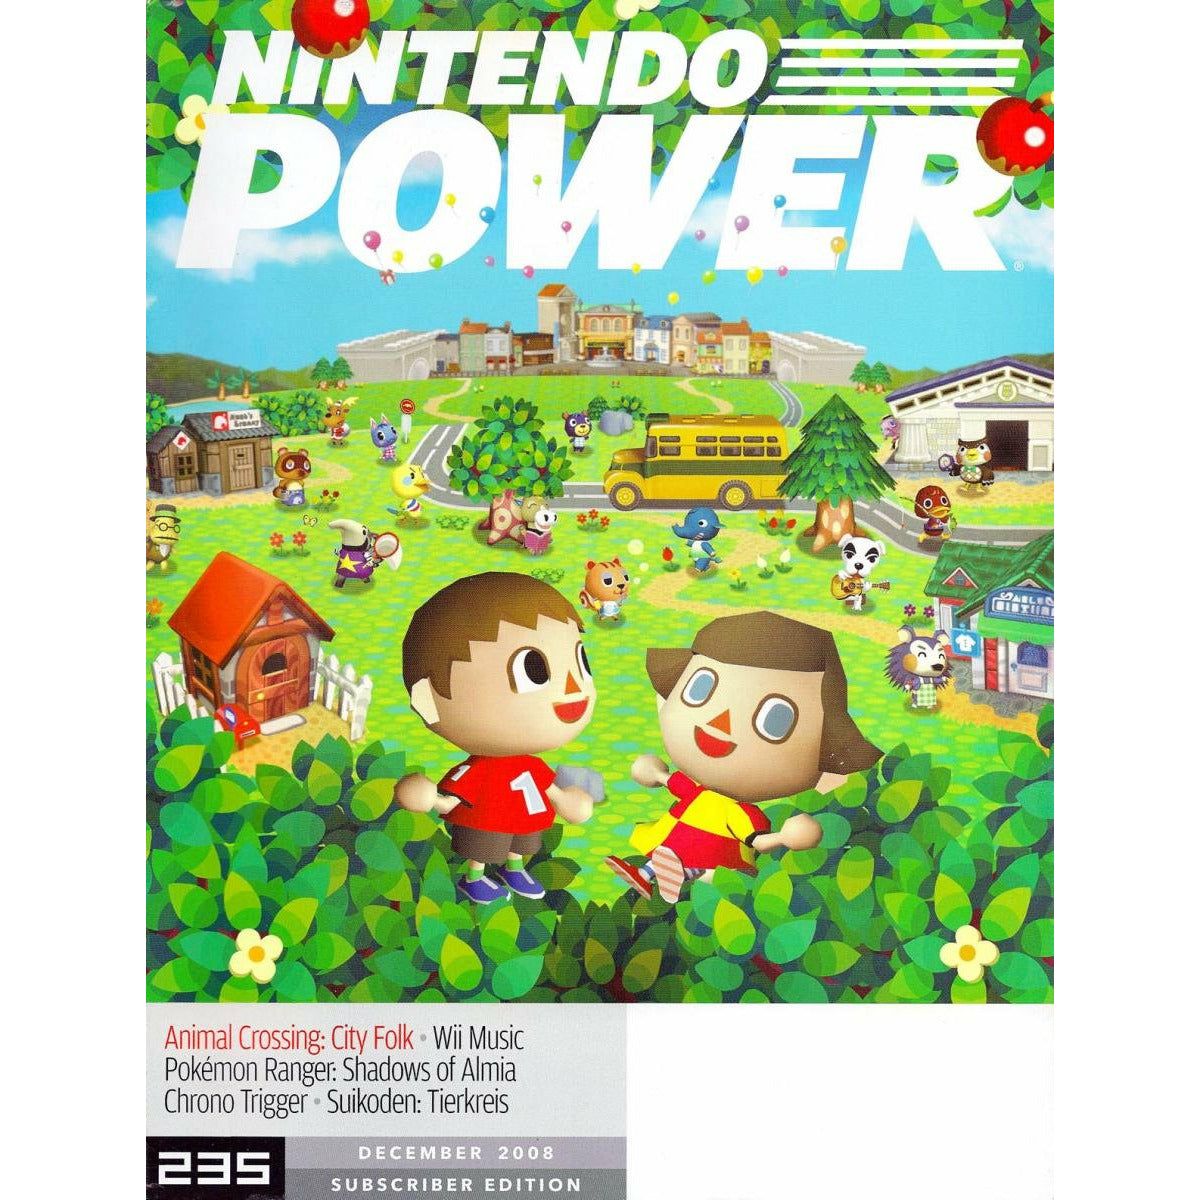 Nintendo Power Magazine (#235 Subscriber Edition) - Complete and/or Good Condition